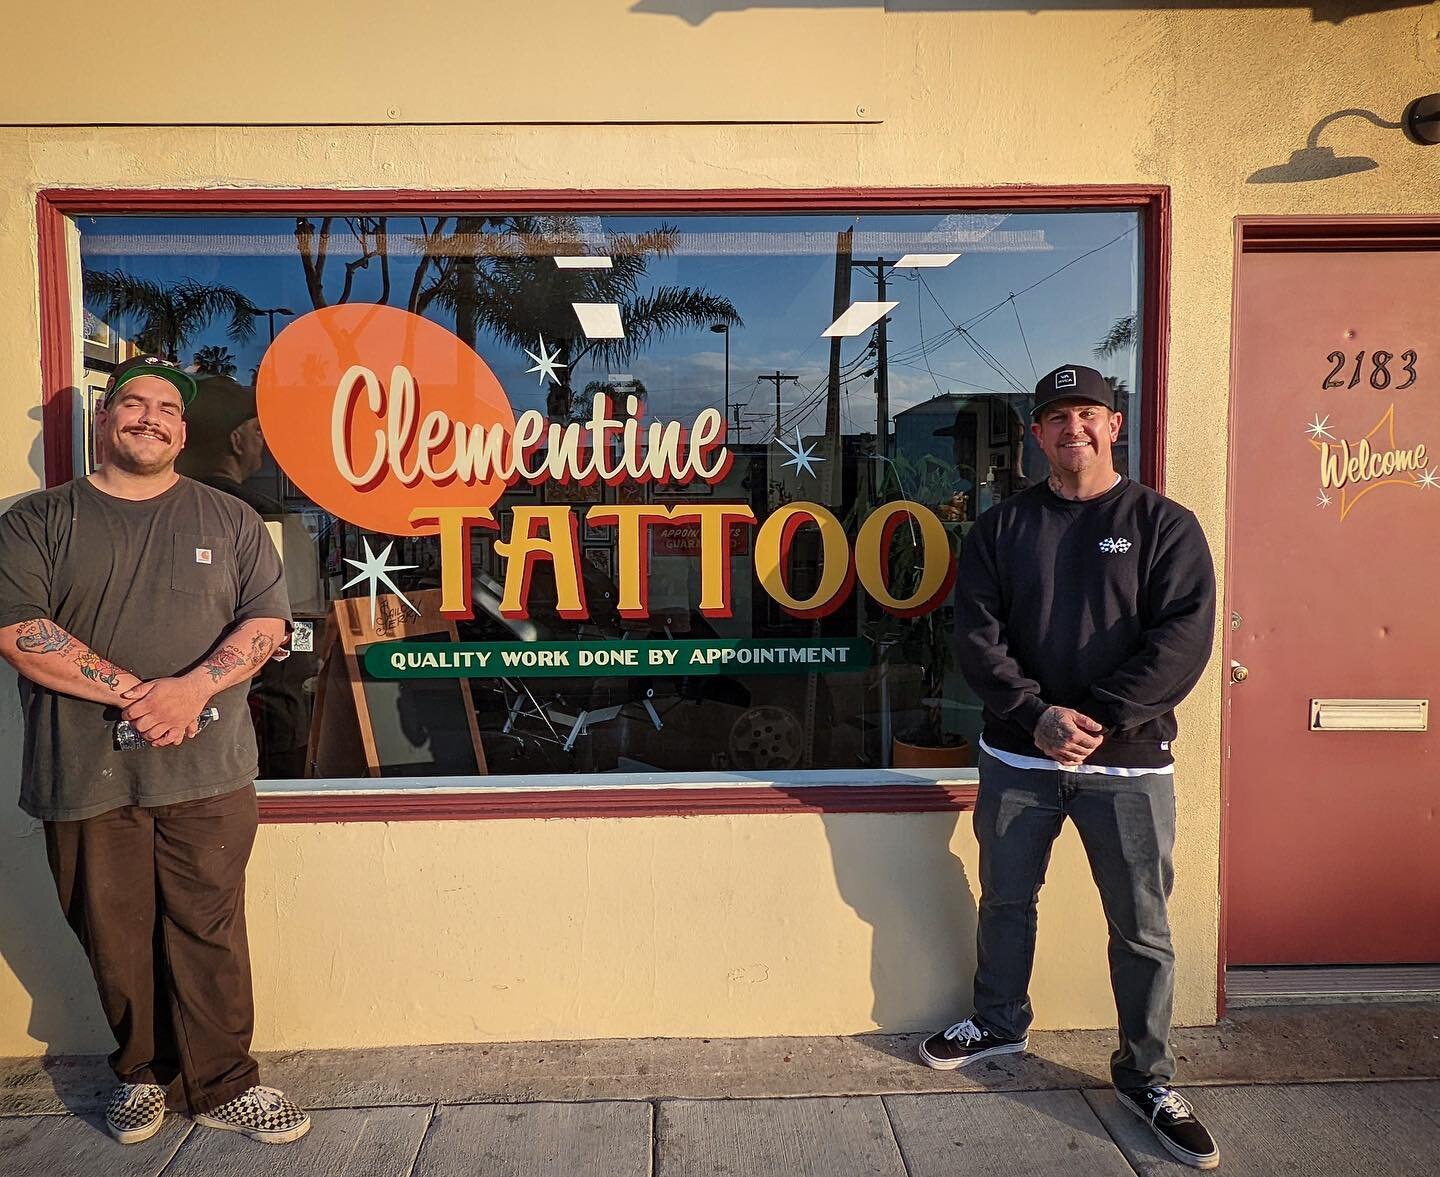 Very excited to announce that we finally have some proper signage thanks to @nacho_average_signs you did a great job Mike!! We are beyond stoked! Thanks again! #handpaintedsigns #windowsign #tattoosign #handlettering #reversepainting #welcometoclemen